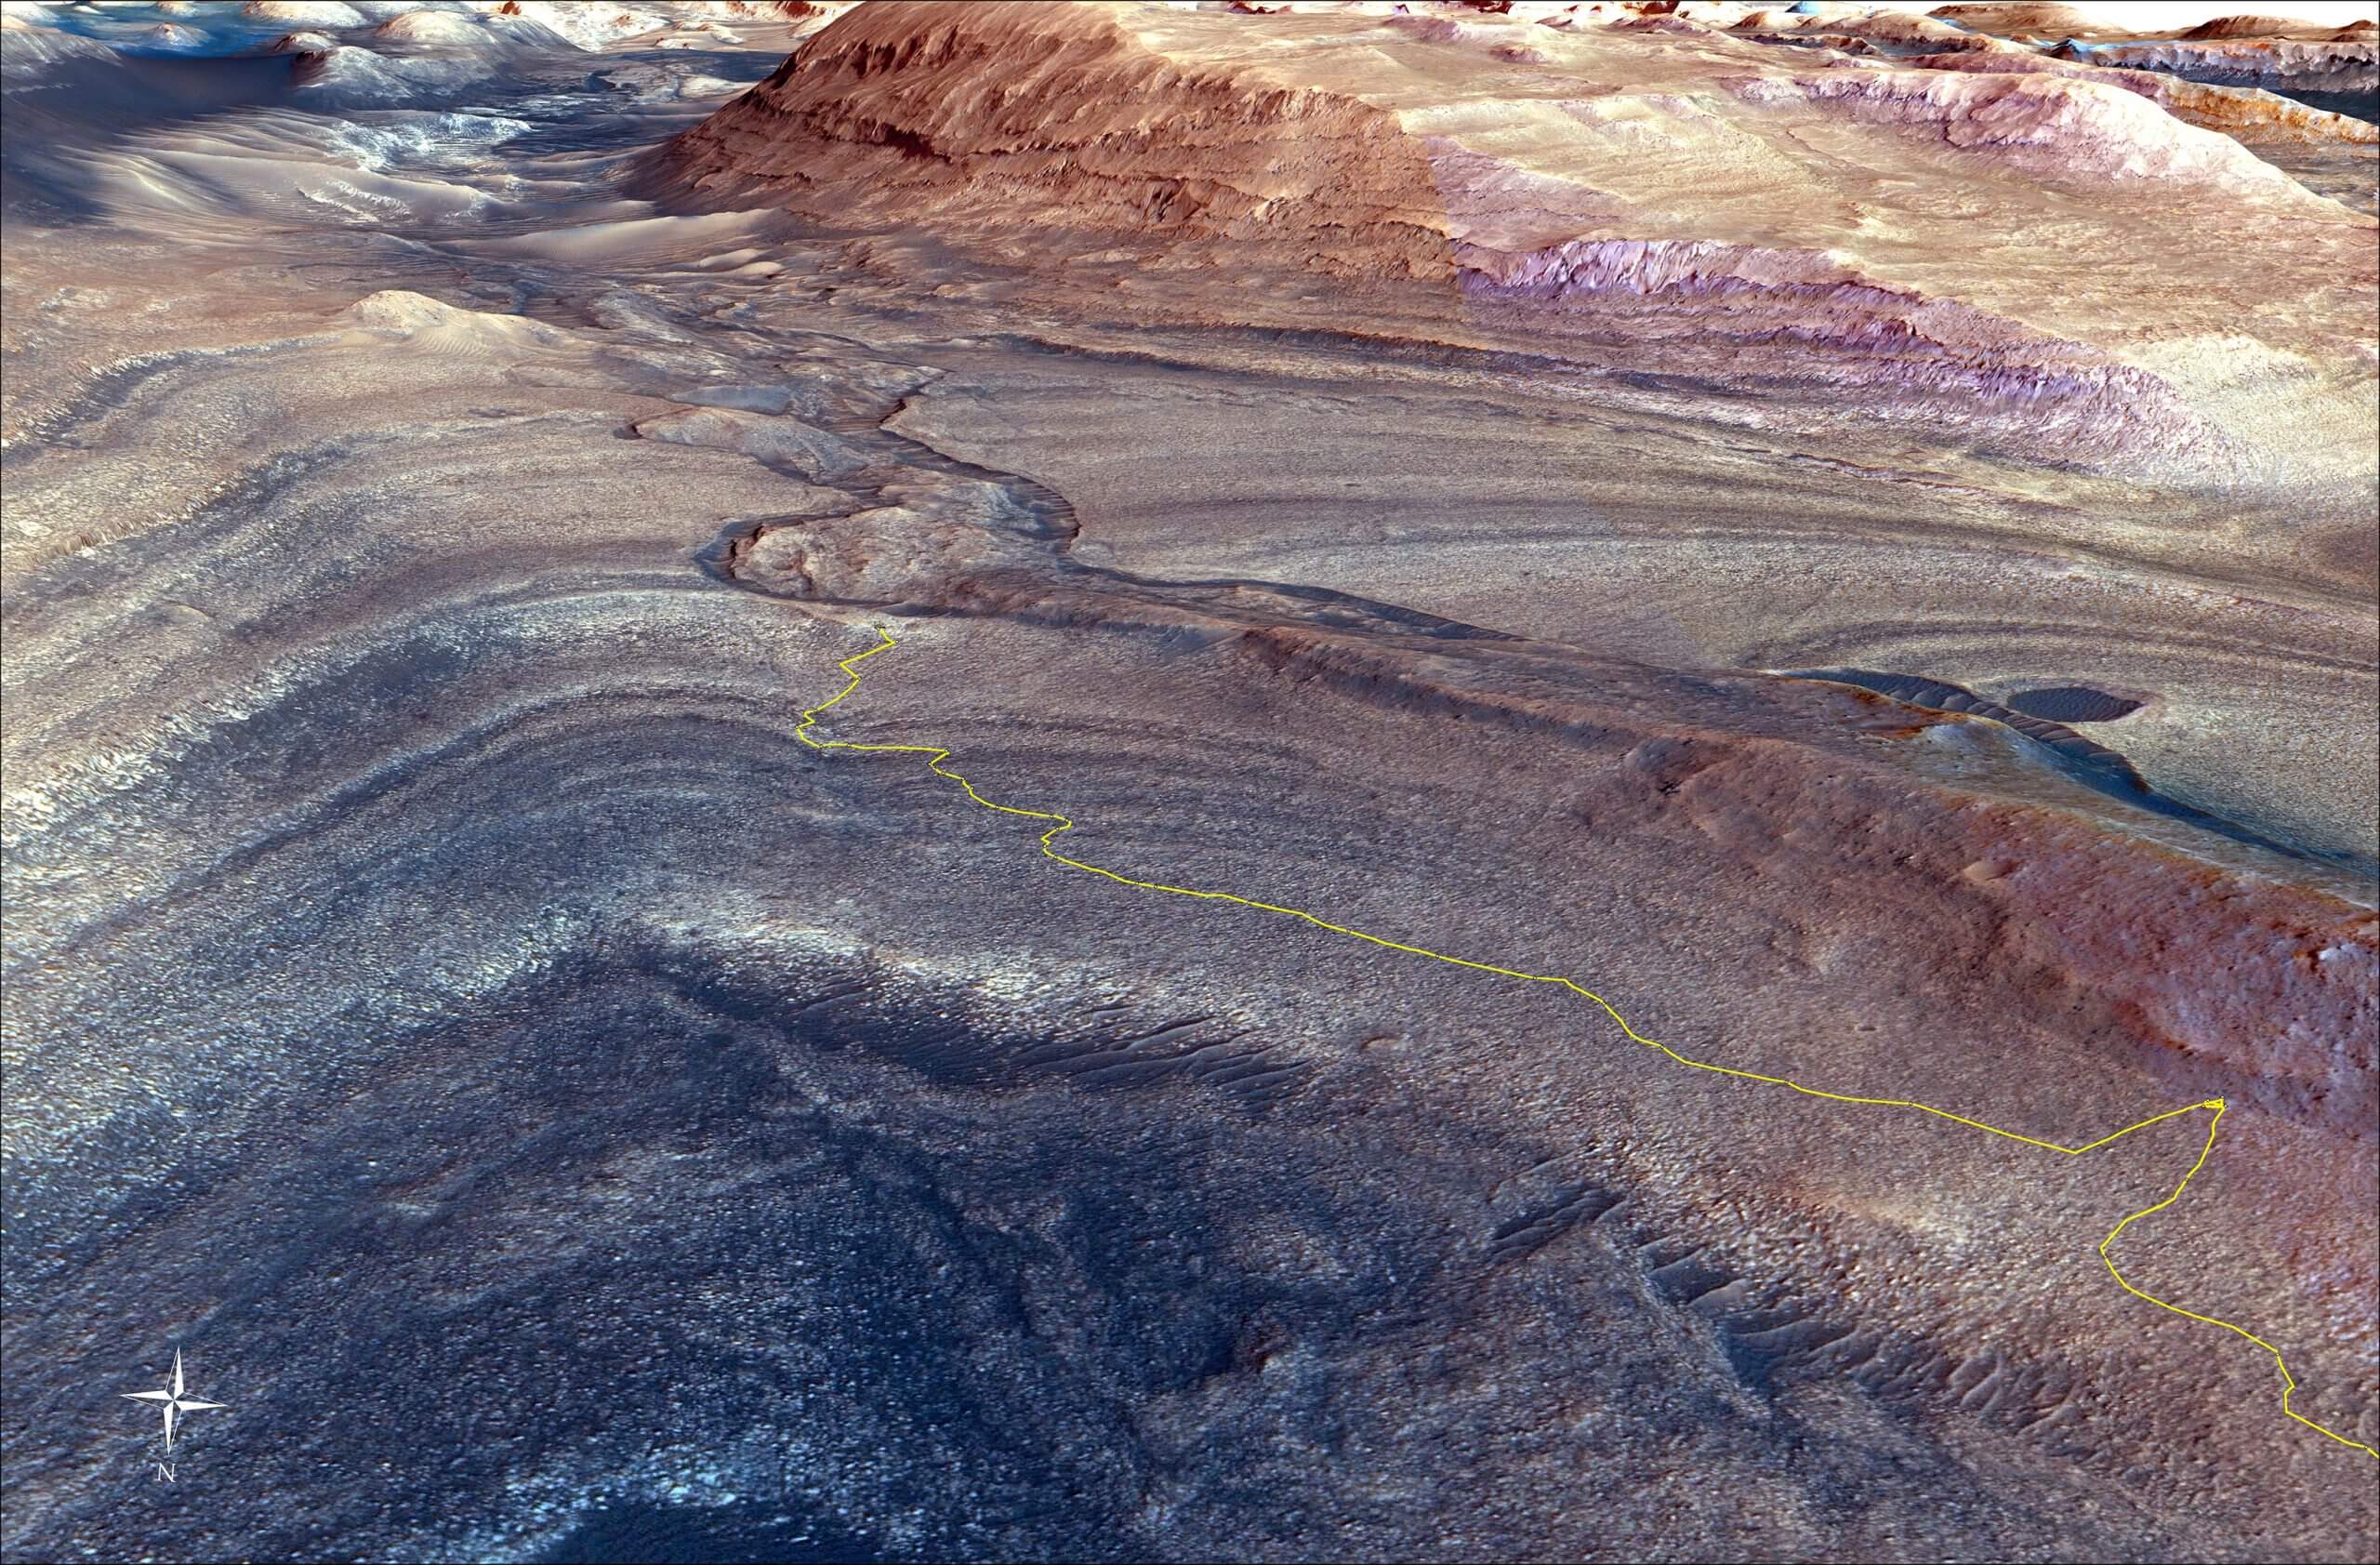 The steep path that Curiosity traveled to reach Gediz Vallis is highlighted in yellow in this diagram. At lower right is the point where the vehicle turned to get a closer look at the ridge formed long ago by streams pouring down Mount Sharp. Credit: NASA/JPL-Caltech/UC Berkeley